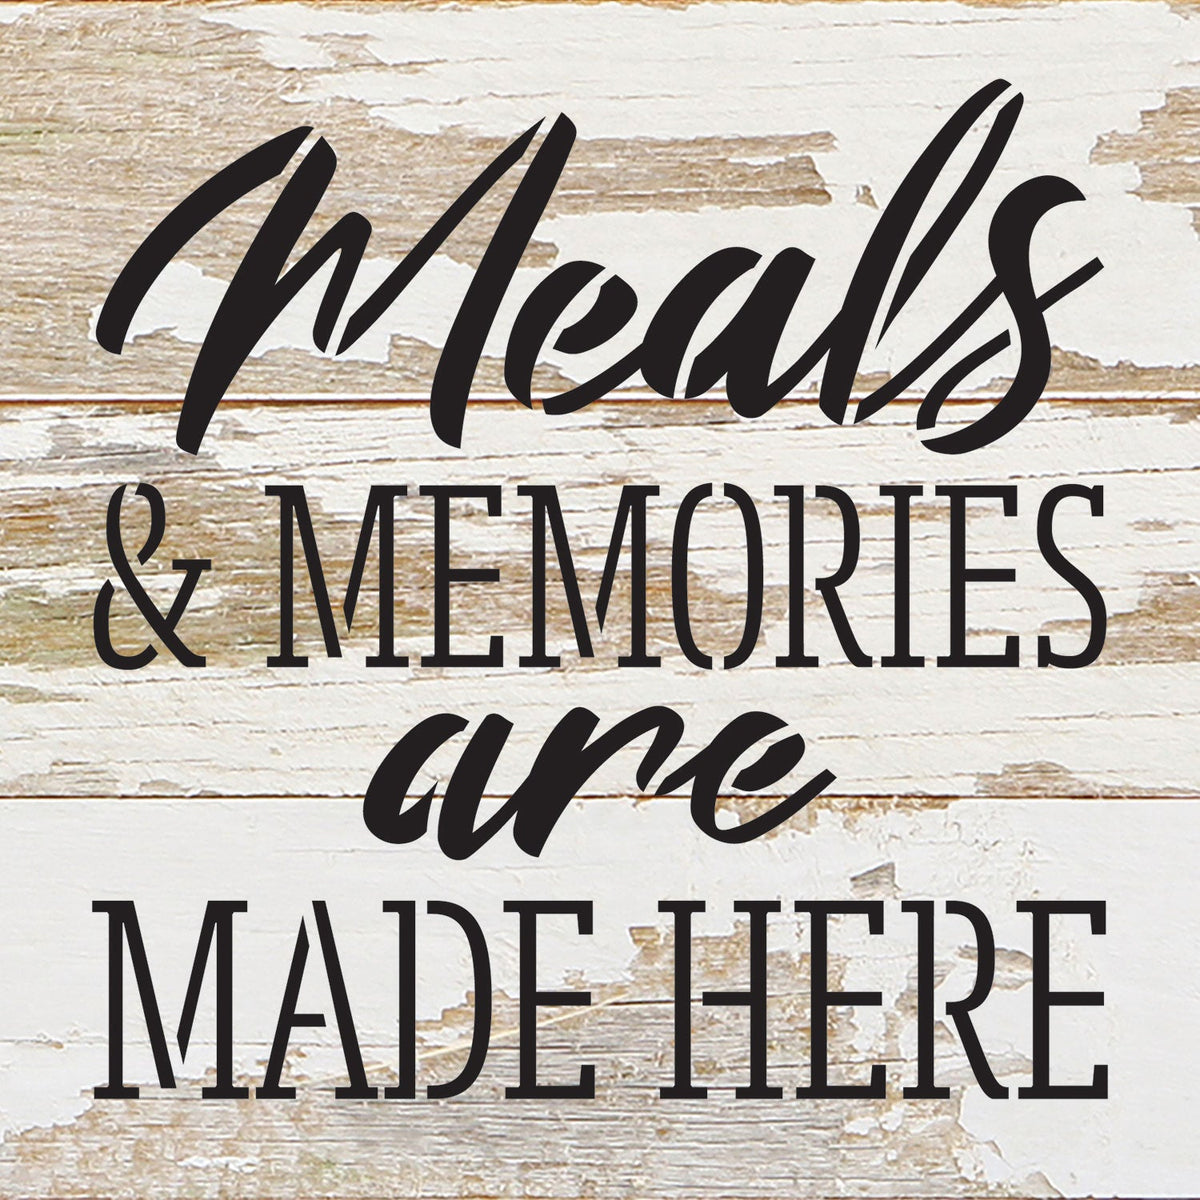 Meals & Memories are made here / 6x6 Reclaimed Wood Wall Decor Sign